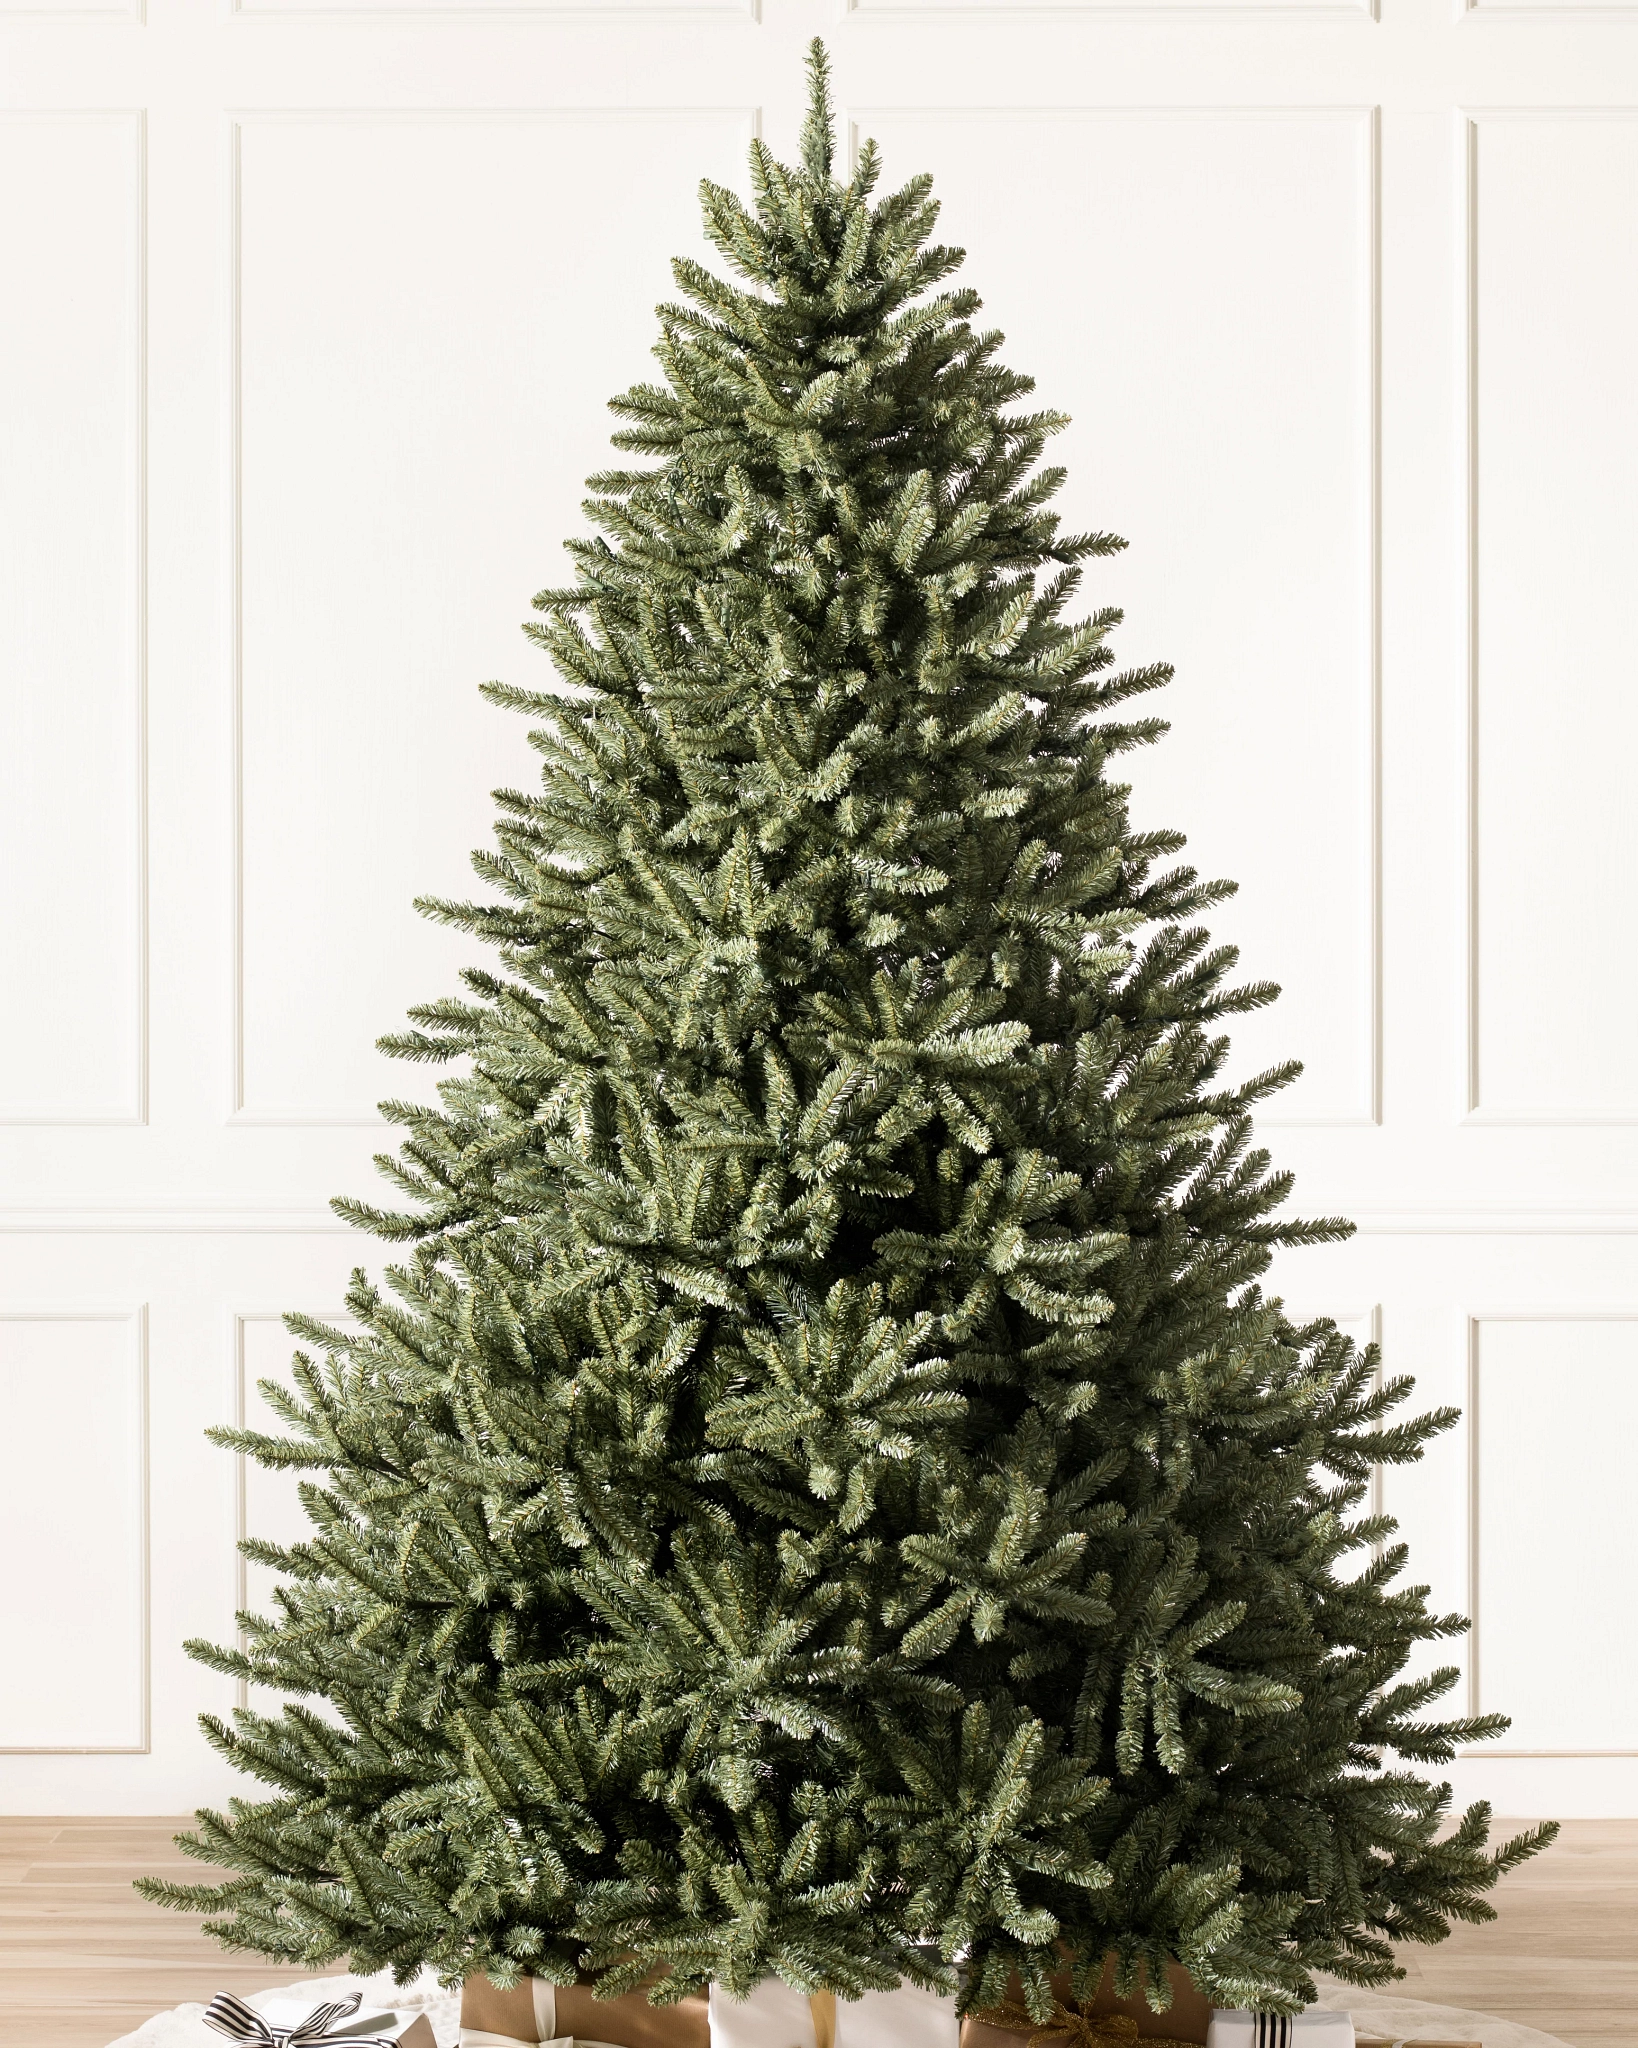 Where To Buy Cheap Artificial Christmas Trees?